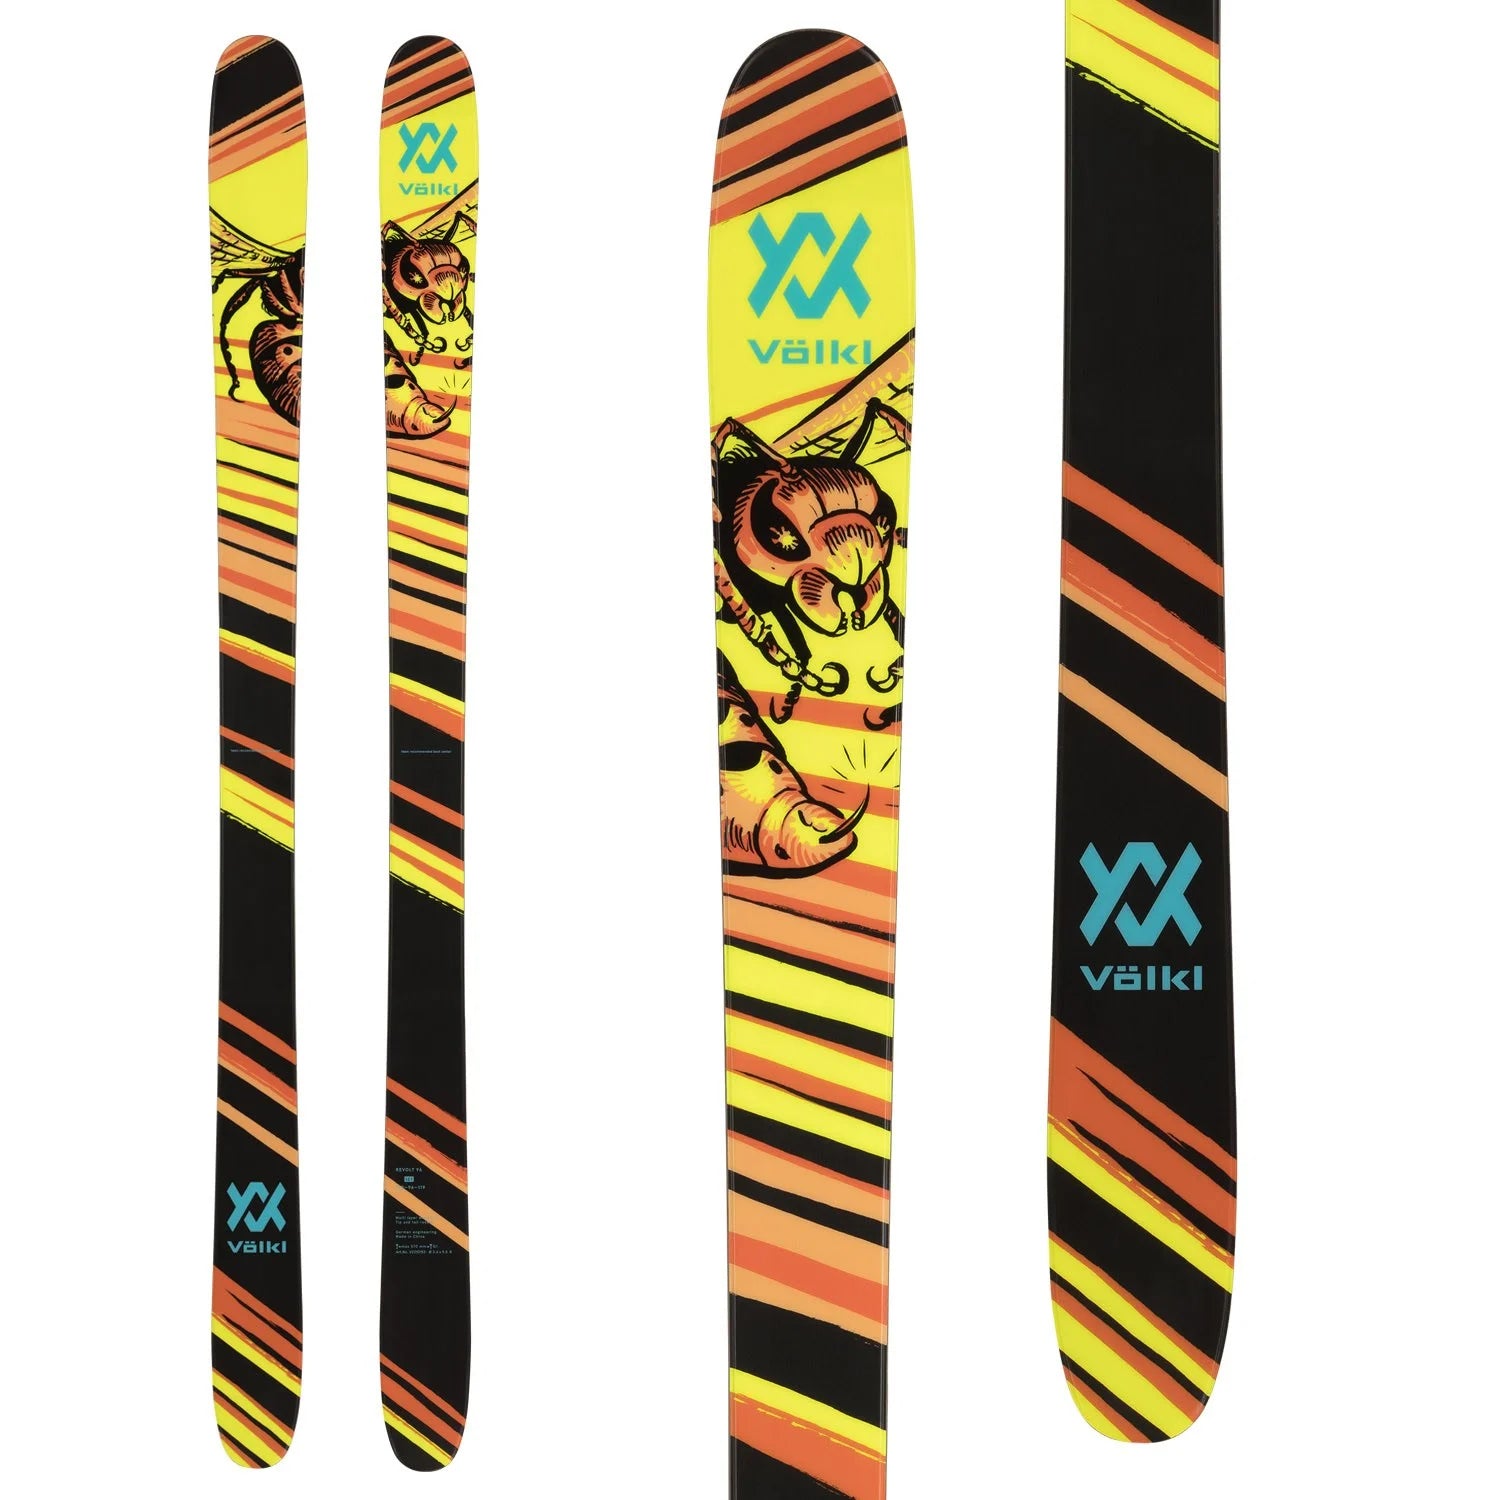 Skis without bindings